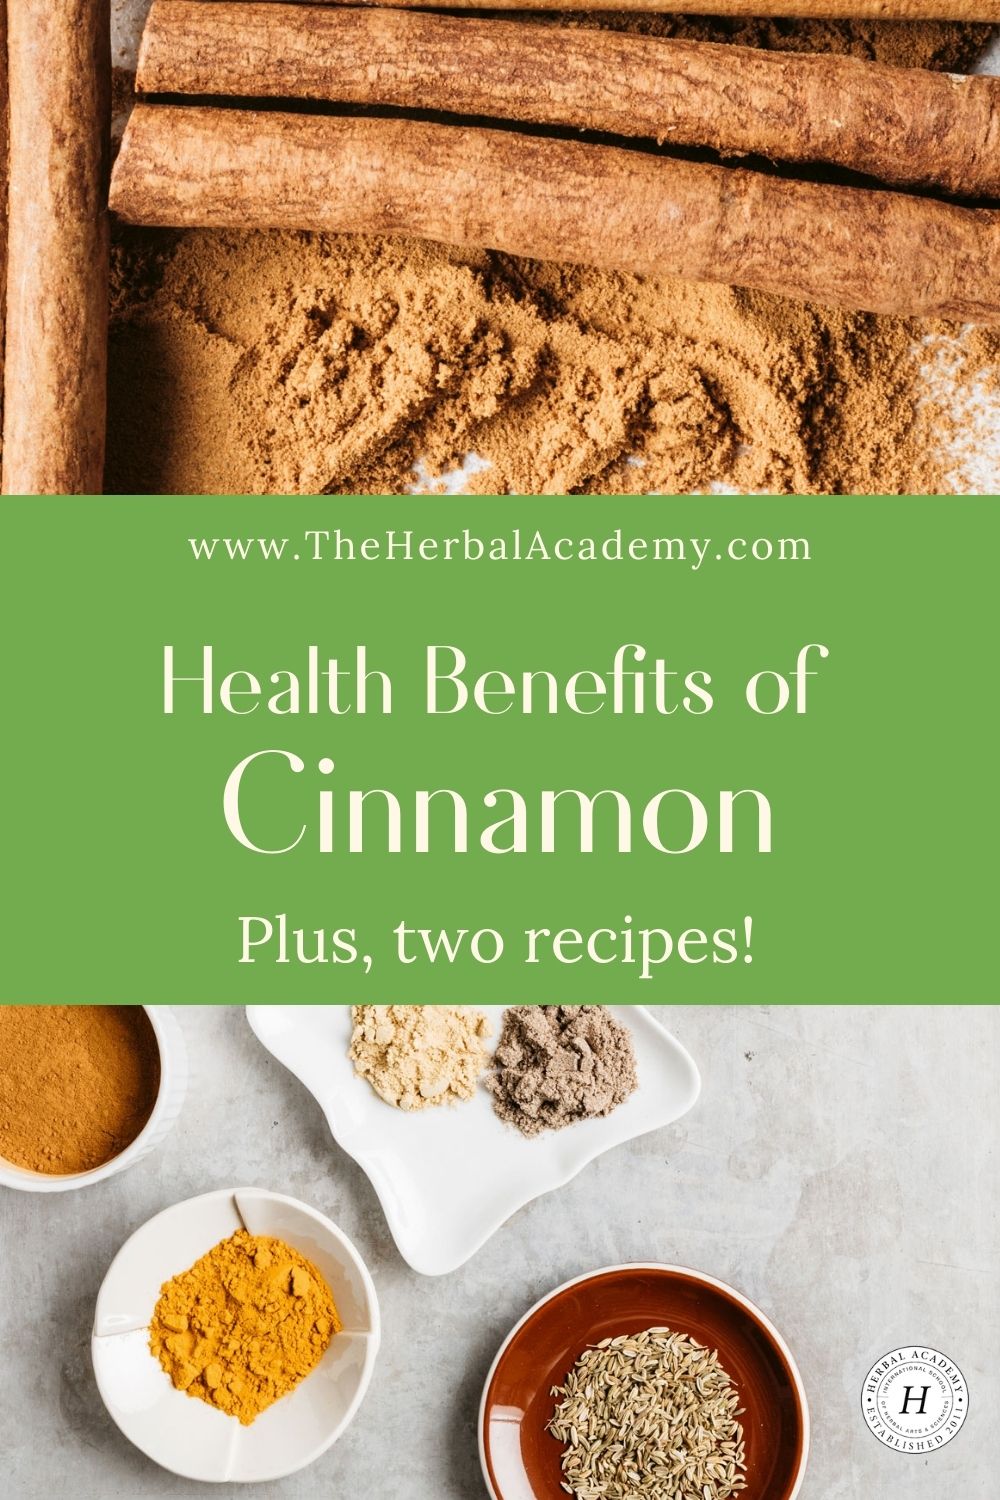 Health Benefits of Cinnamon + 2 Warming Recipes  | Herbal Academy | Learn the many health benefits of cinnamon, plus find two recipes for using it in your kitchen as a warming spice blend or compote topping.